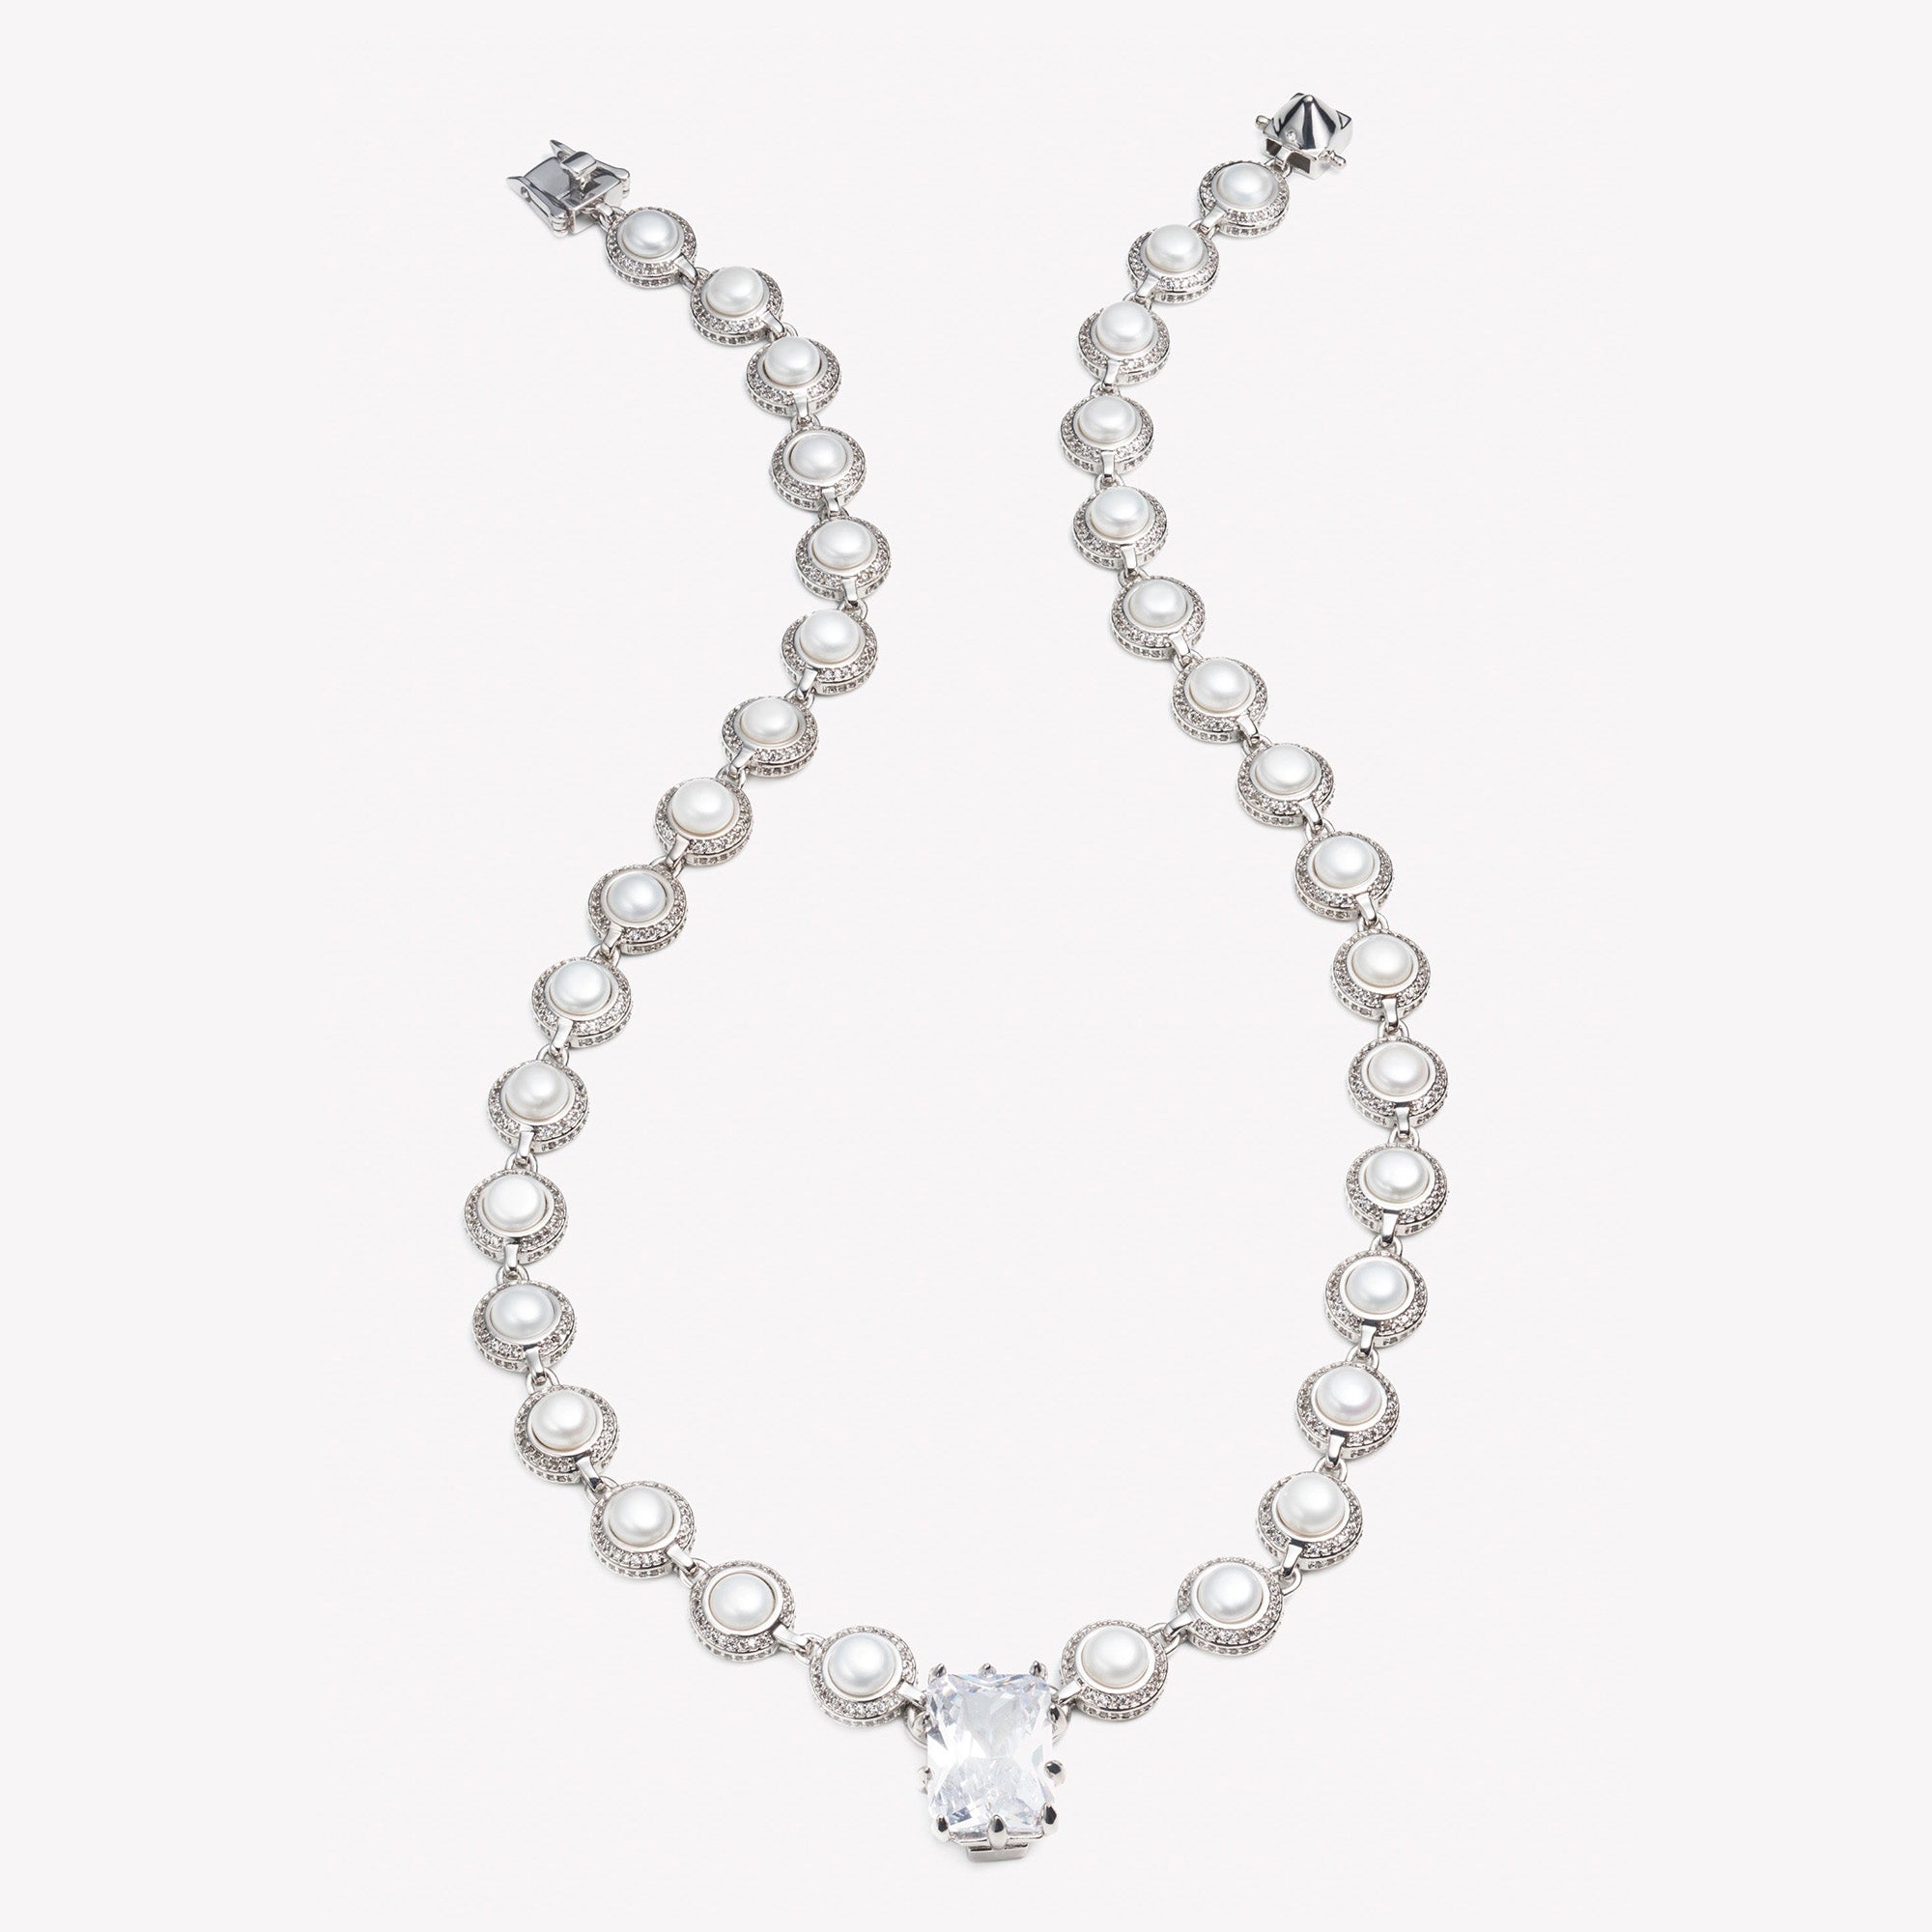 South Sea White Pearl Necklace | HN JEWELRY